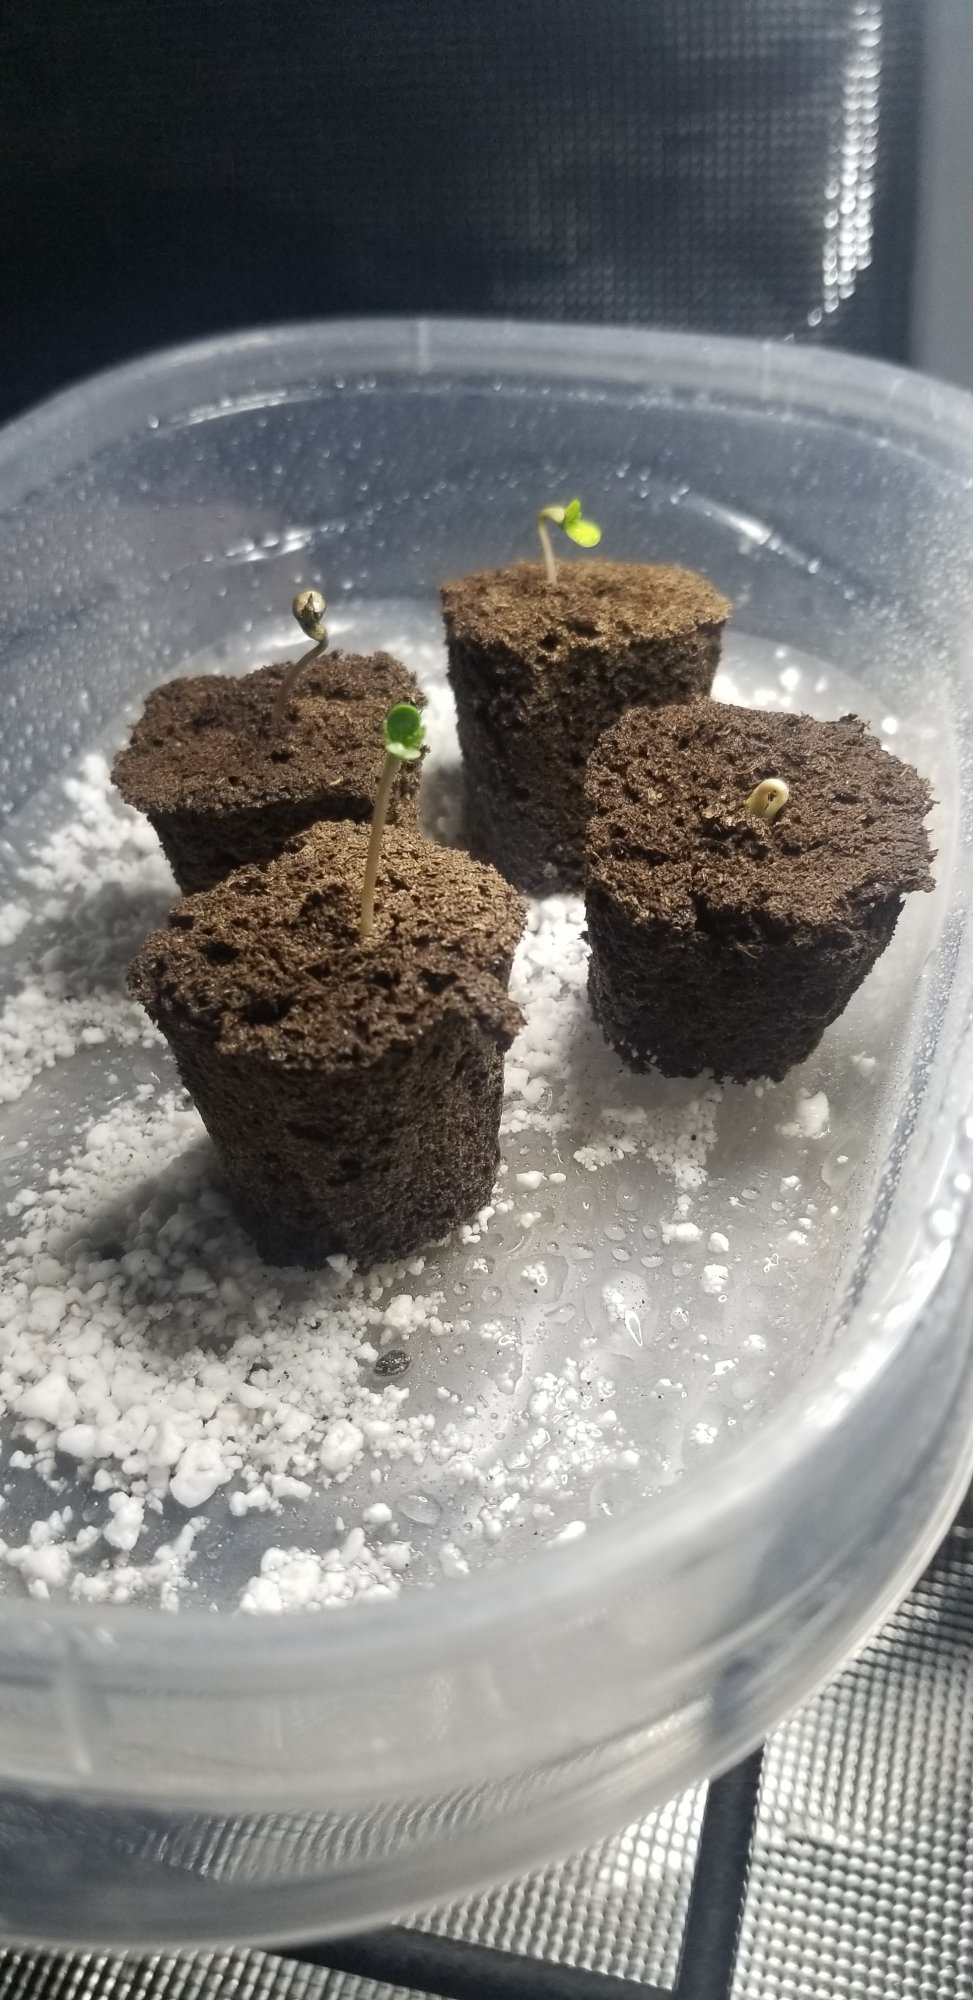 Trial error monitoring adjusting first grow coco coir daily pics and updates 2